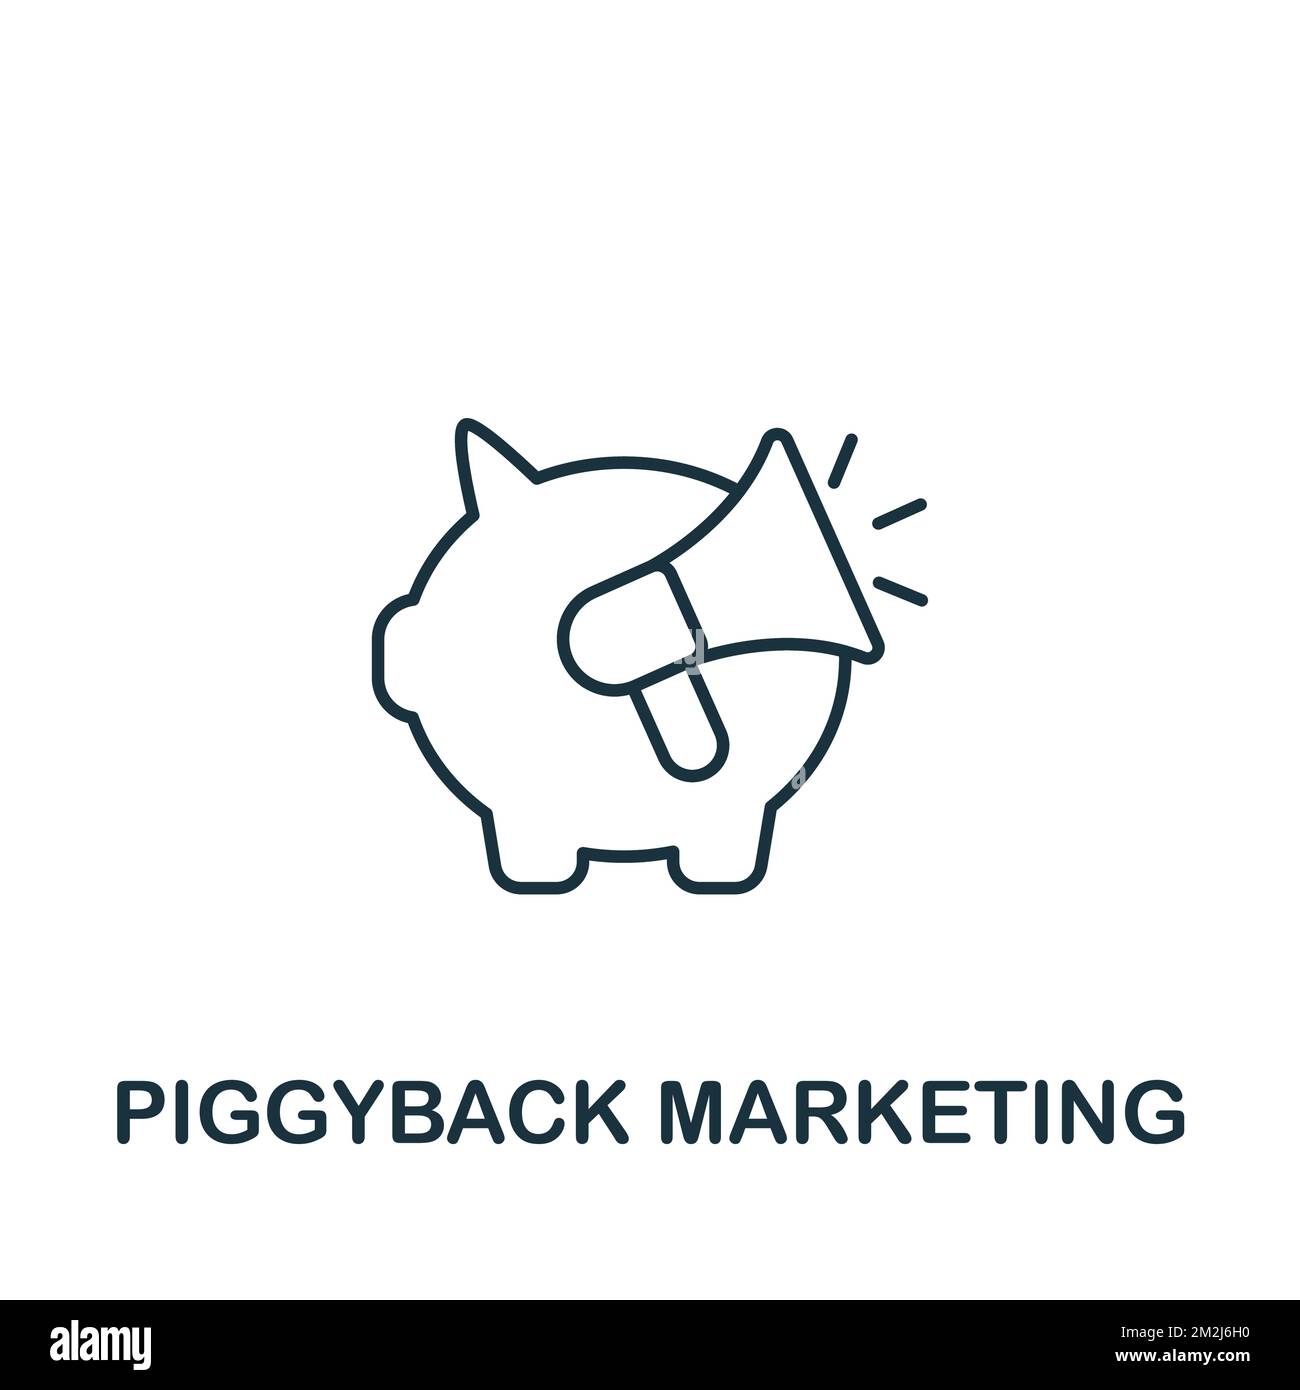 Piggyback Marketing icon. Monochrome simple Global Business icon for templates, web design and infographics Stock Vector